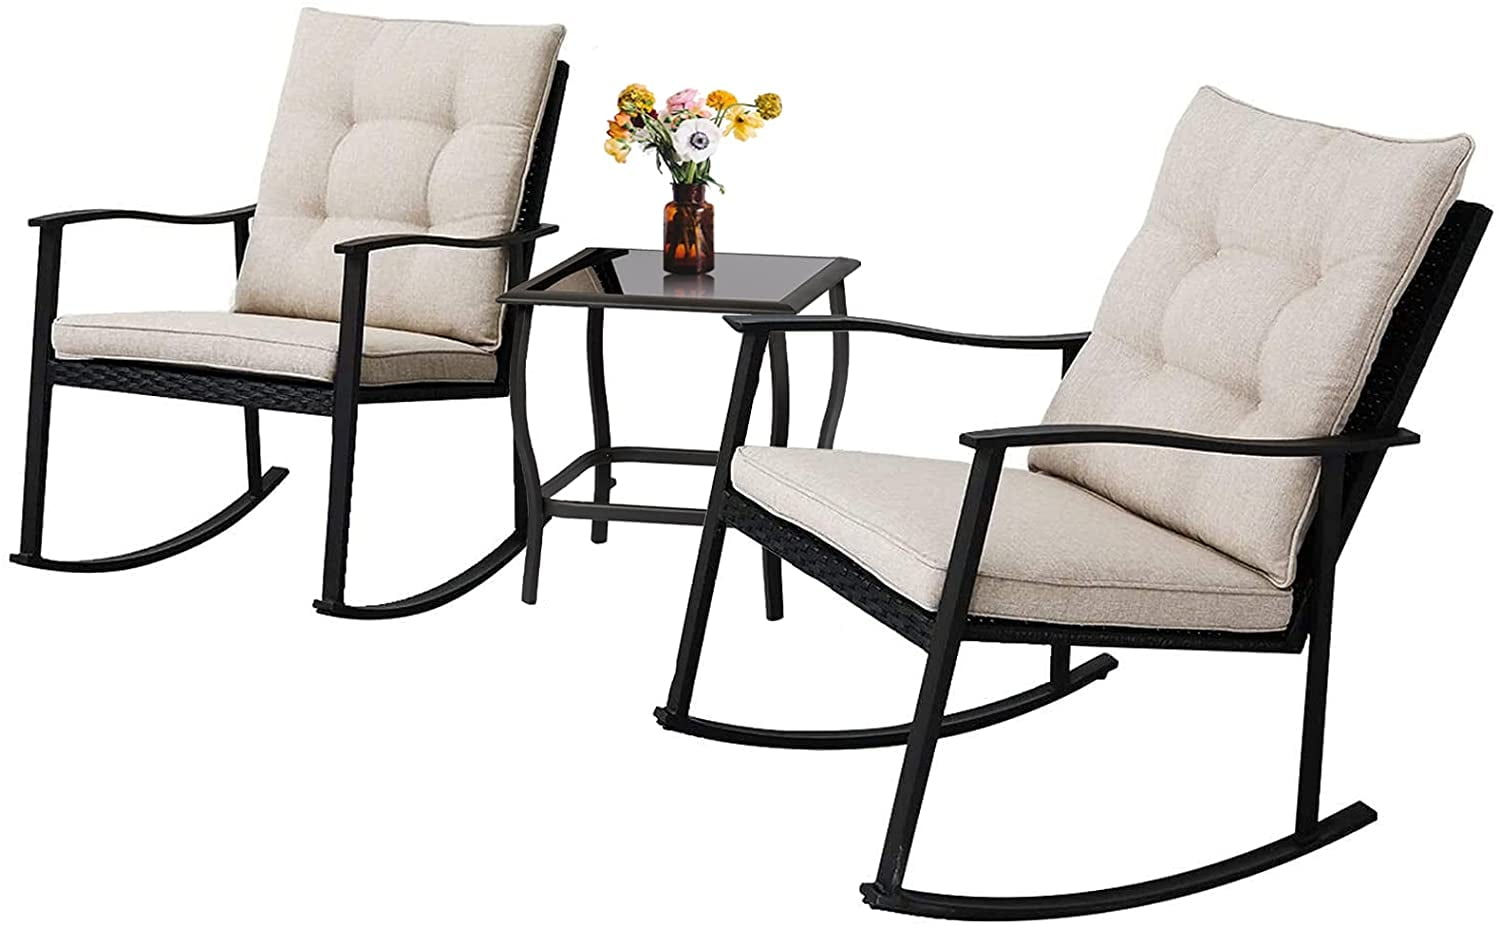 3PCS/Set Rocking Bistro Set Wicker Patio Outdoor Porch Chairs w/ Glass Table US